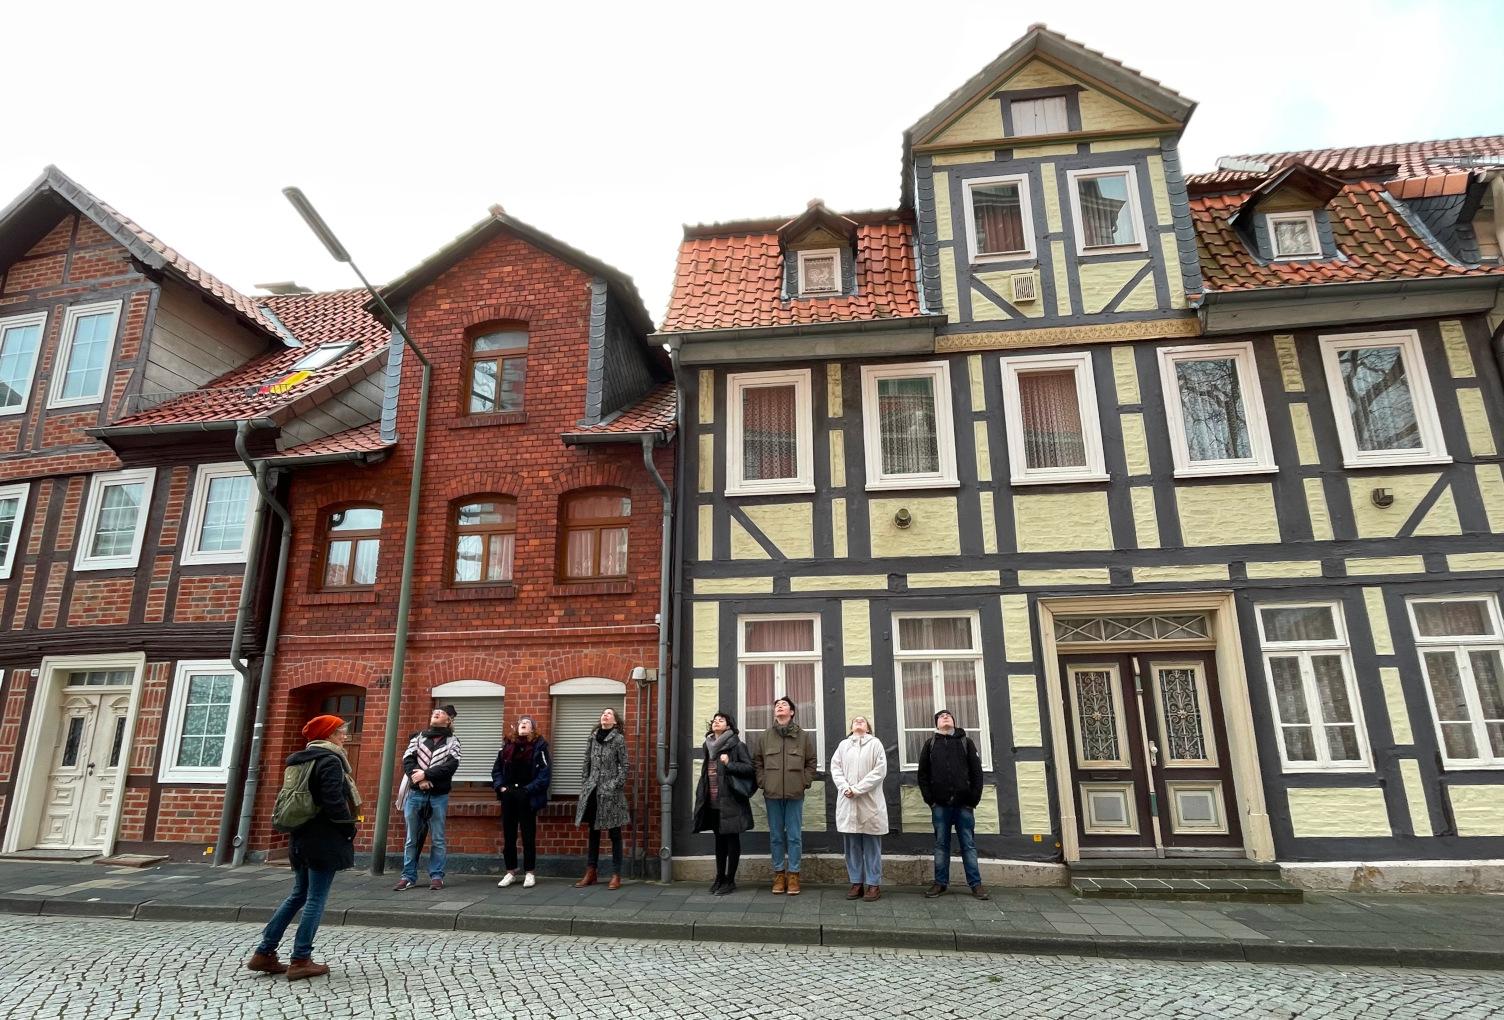 A historical city walk through Helmstedt took place as part of the premiere weekend.